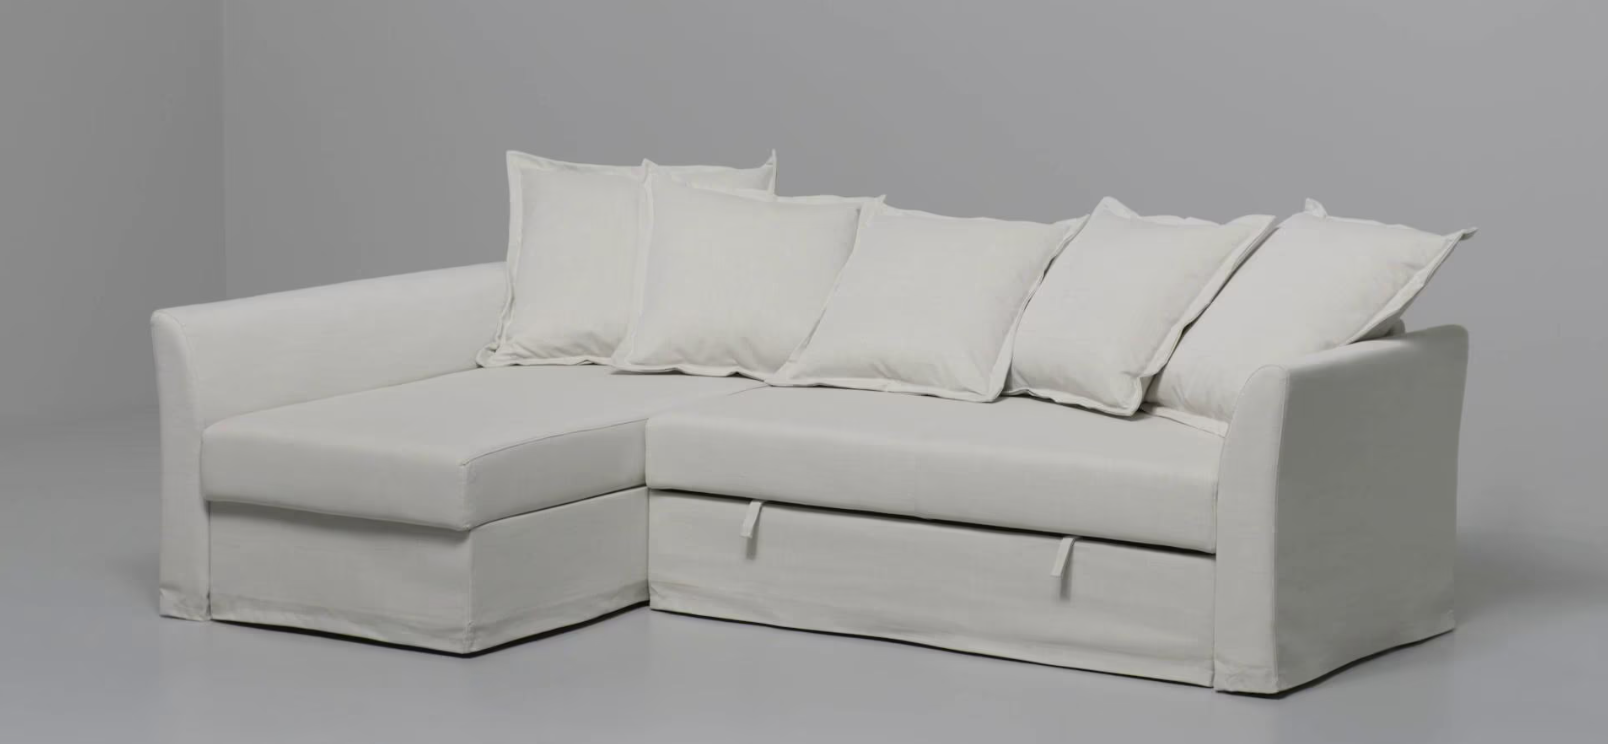 Image of Ikea Holmsund Sleeper Sofa, a versatile and comfortable piece of furniture for small spaces